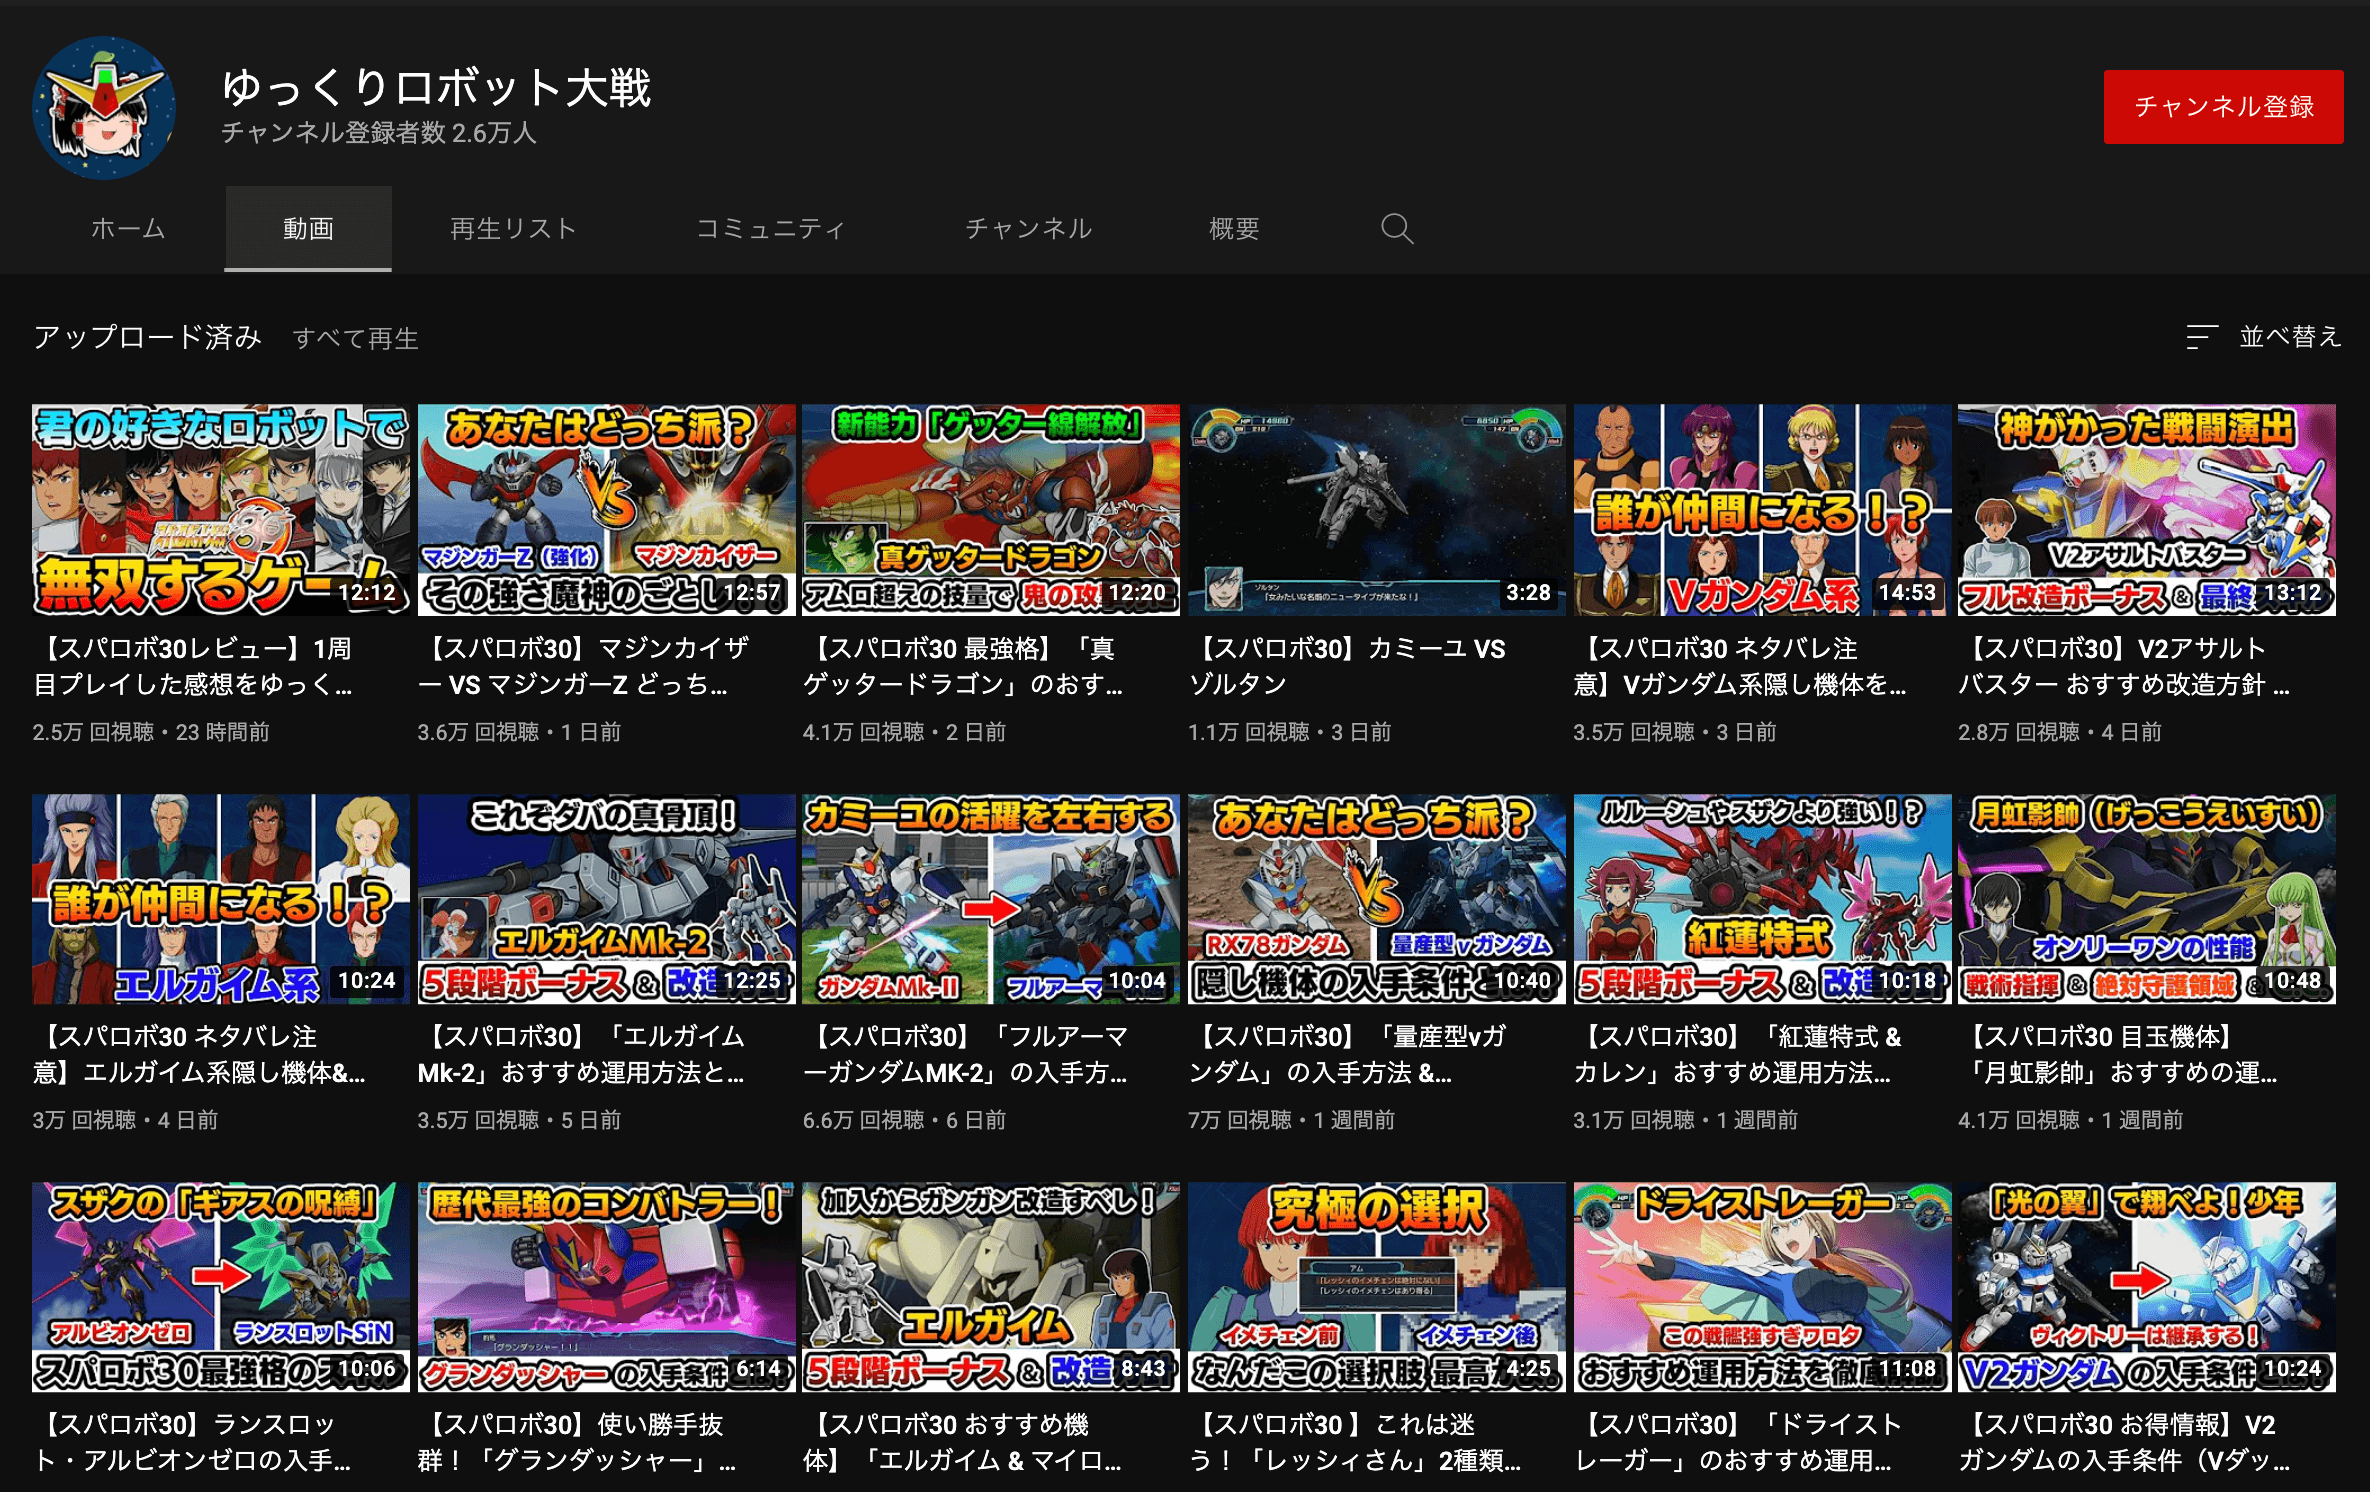 YouTube channnel-related to super robot